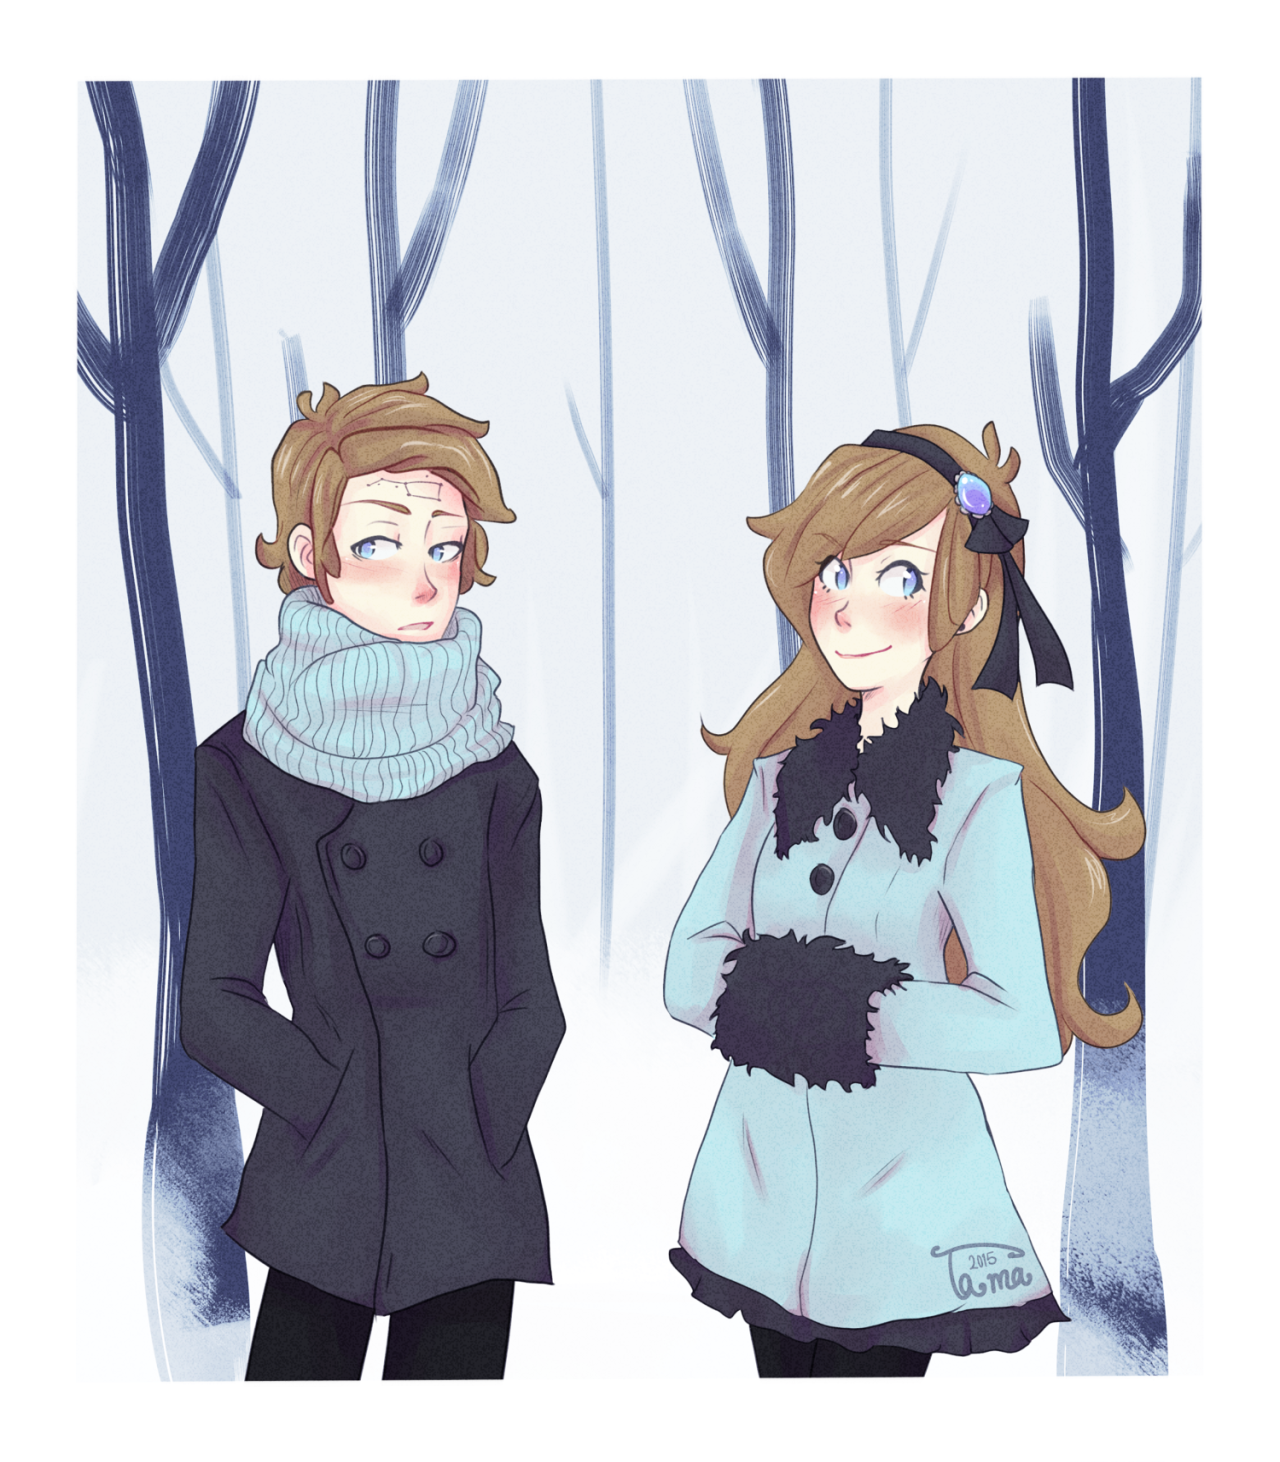 tamamoriichan:
“Merry Christmas @blueswanson! I’m your Secret Santa for the Gravity Falls Secret Santa :3
You said you liked the twins from the Reverse Falls AU so I drew them in some winter clothes. I hope you like it and Merry Christmas :D
”